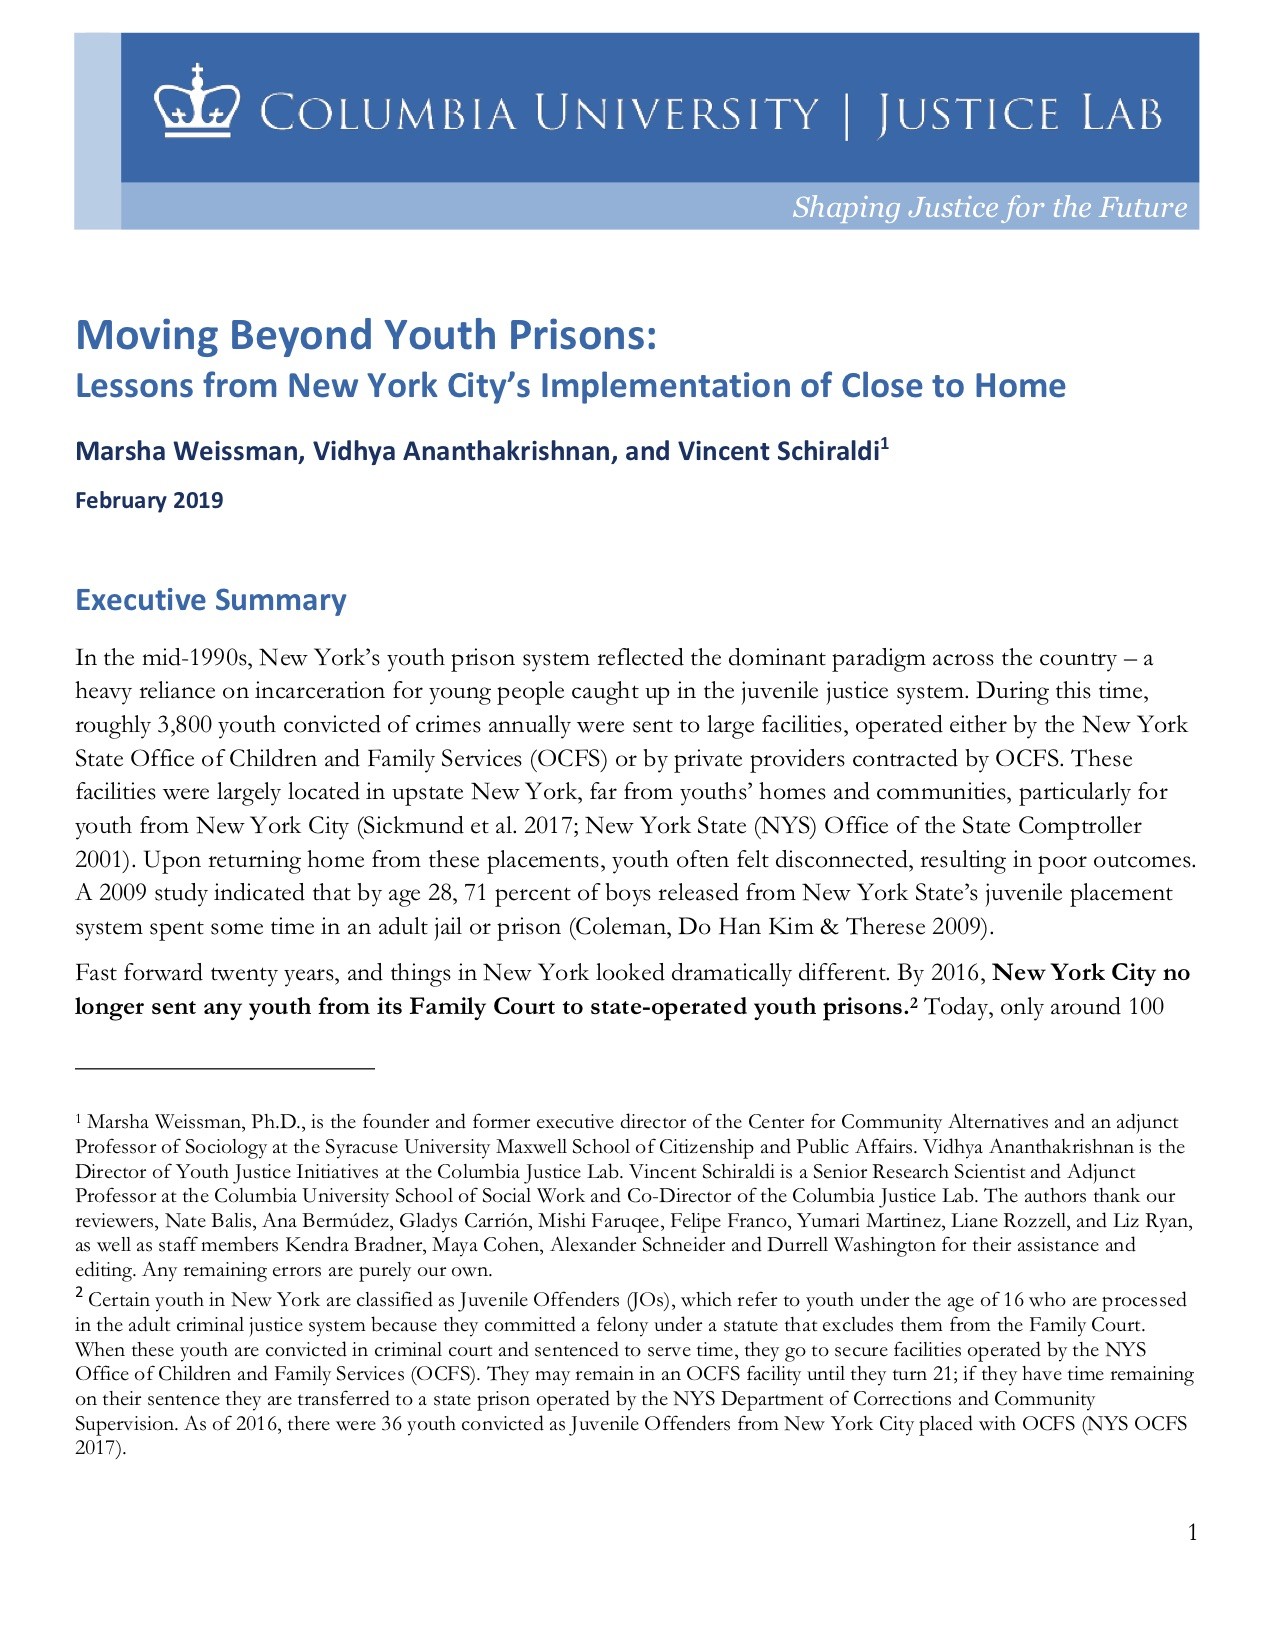 Moving Beyond Youth Prisons: Lessons from New York City’s Implementation of Close to Home